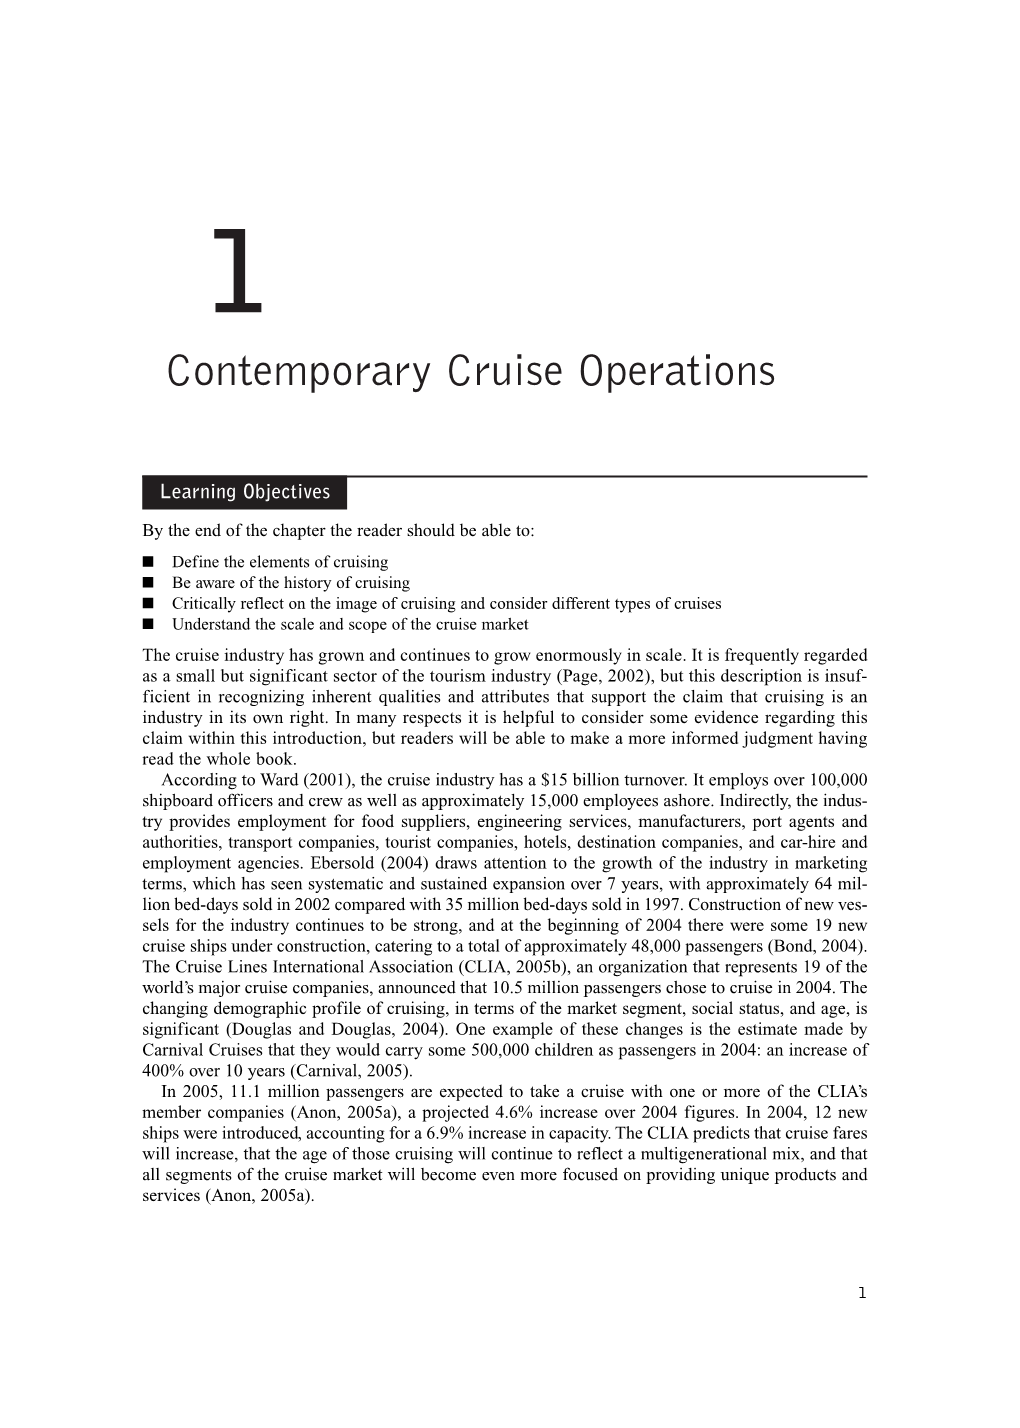 Contemporary Cruise Operations